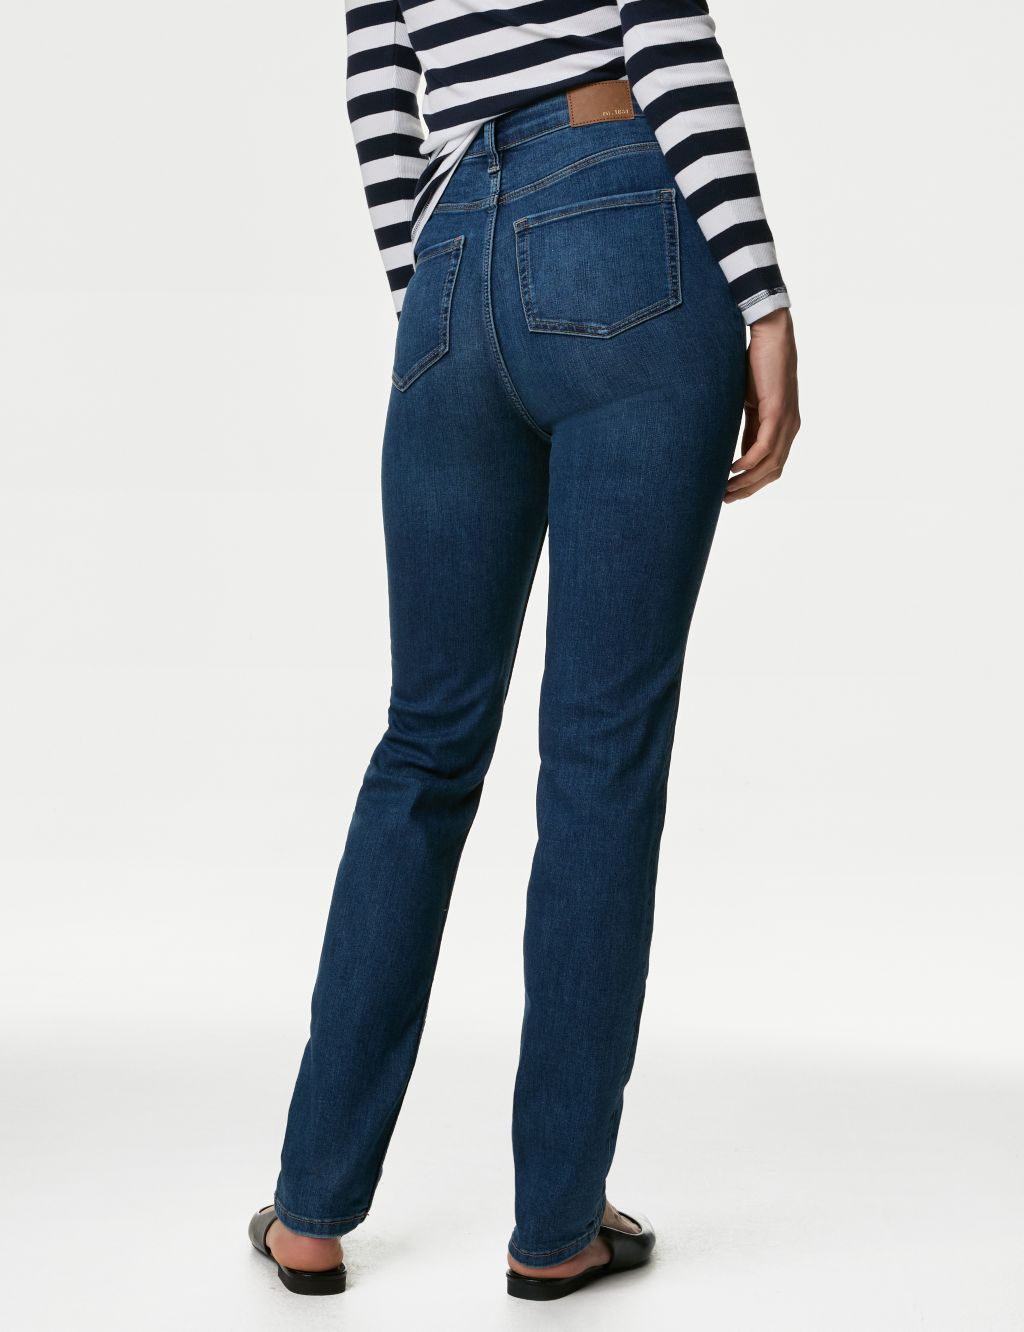 Sienna Supersoft Straight Leg Jeans image 5